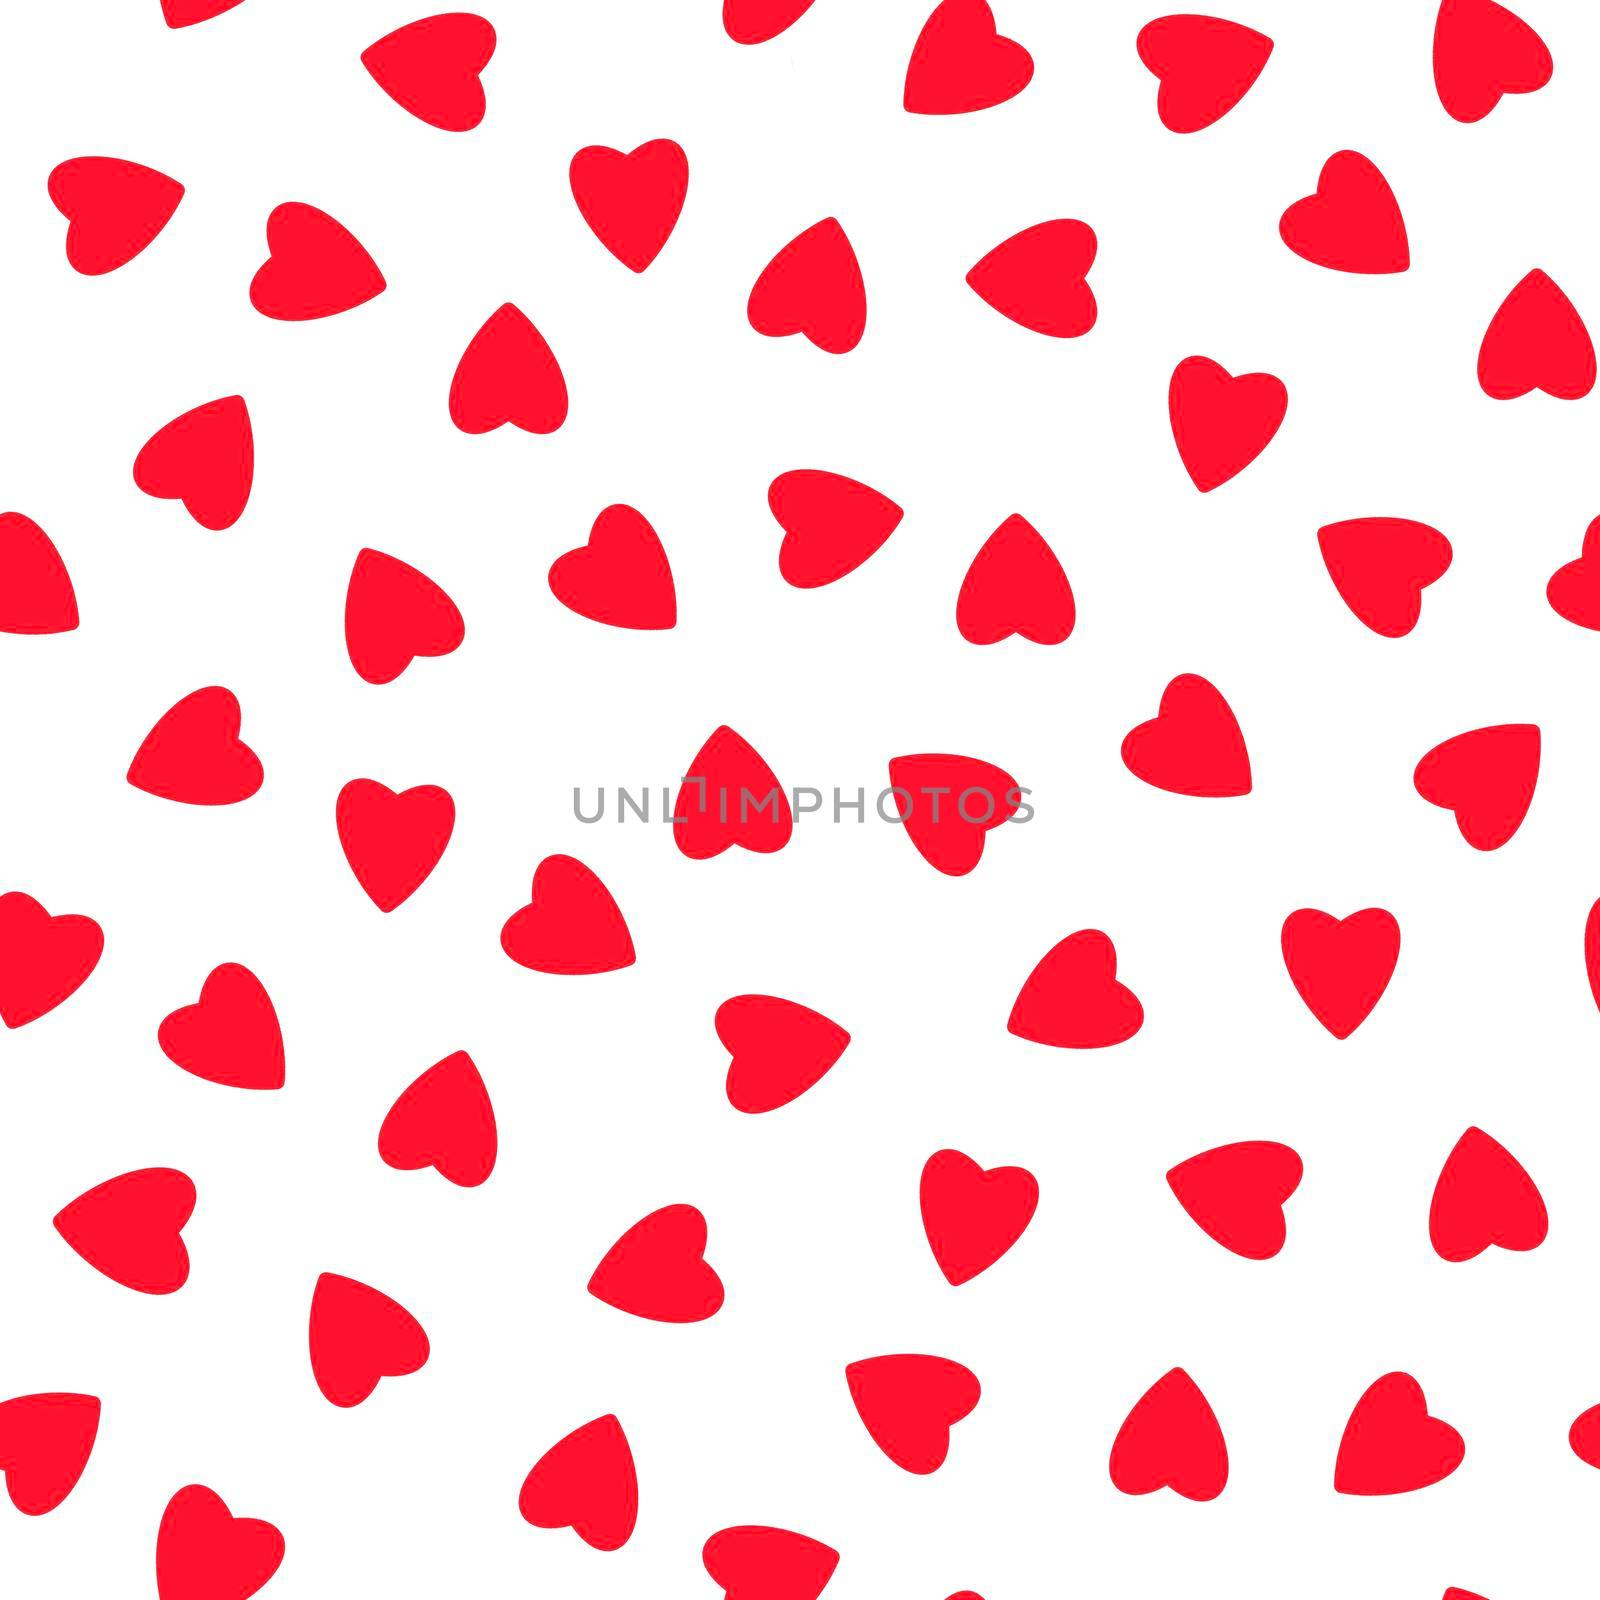 Simple hearts seamless pattern,endless chaotic texture made of tiny heart silhouettes.Valentines,mothers day background.Great for Easter,wedding,scrapbook,gift wrapping paper,textiles.Red on white. by Angelsmoon